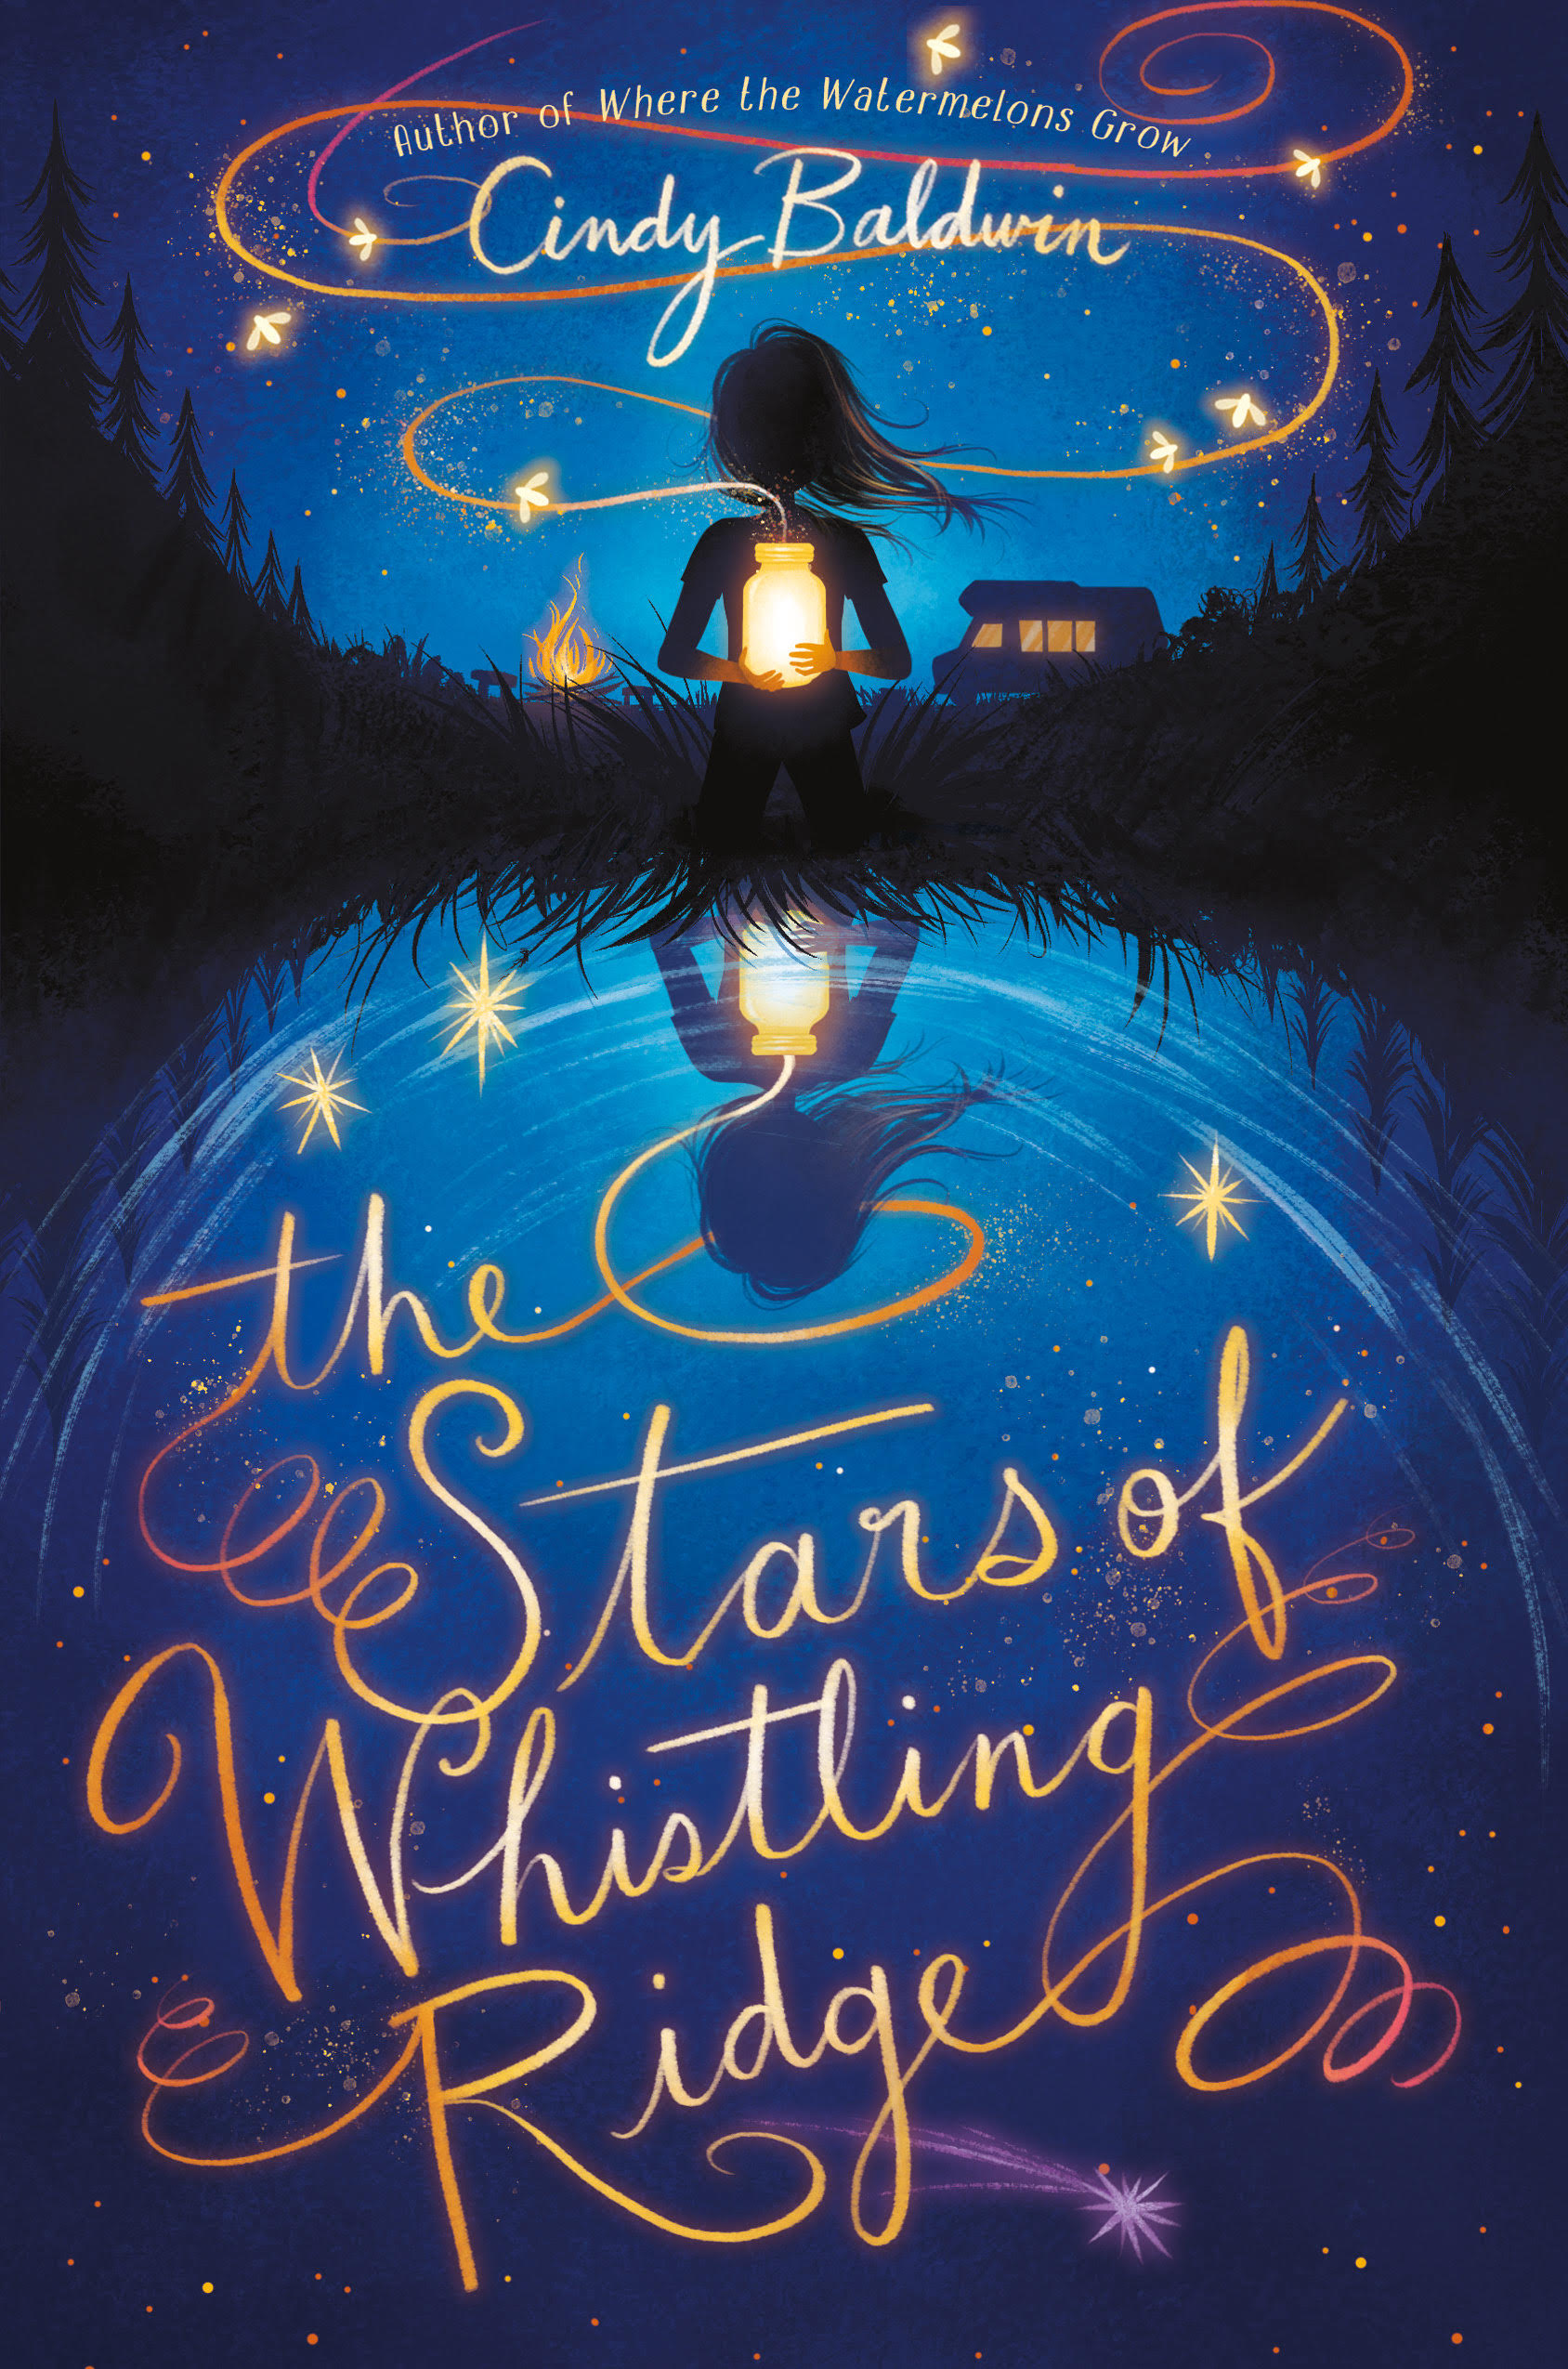 A dark blue cover with silhouette of girl releasing fireflies all reflected a pond.